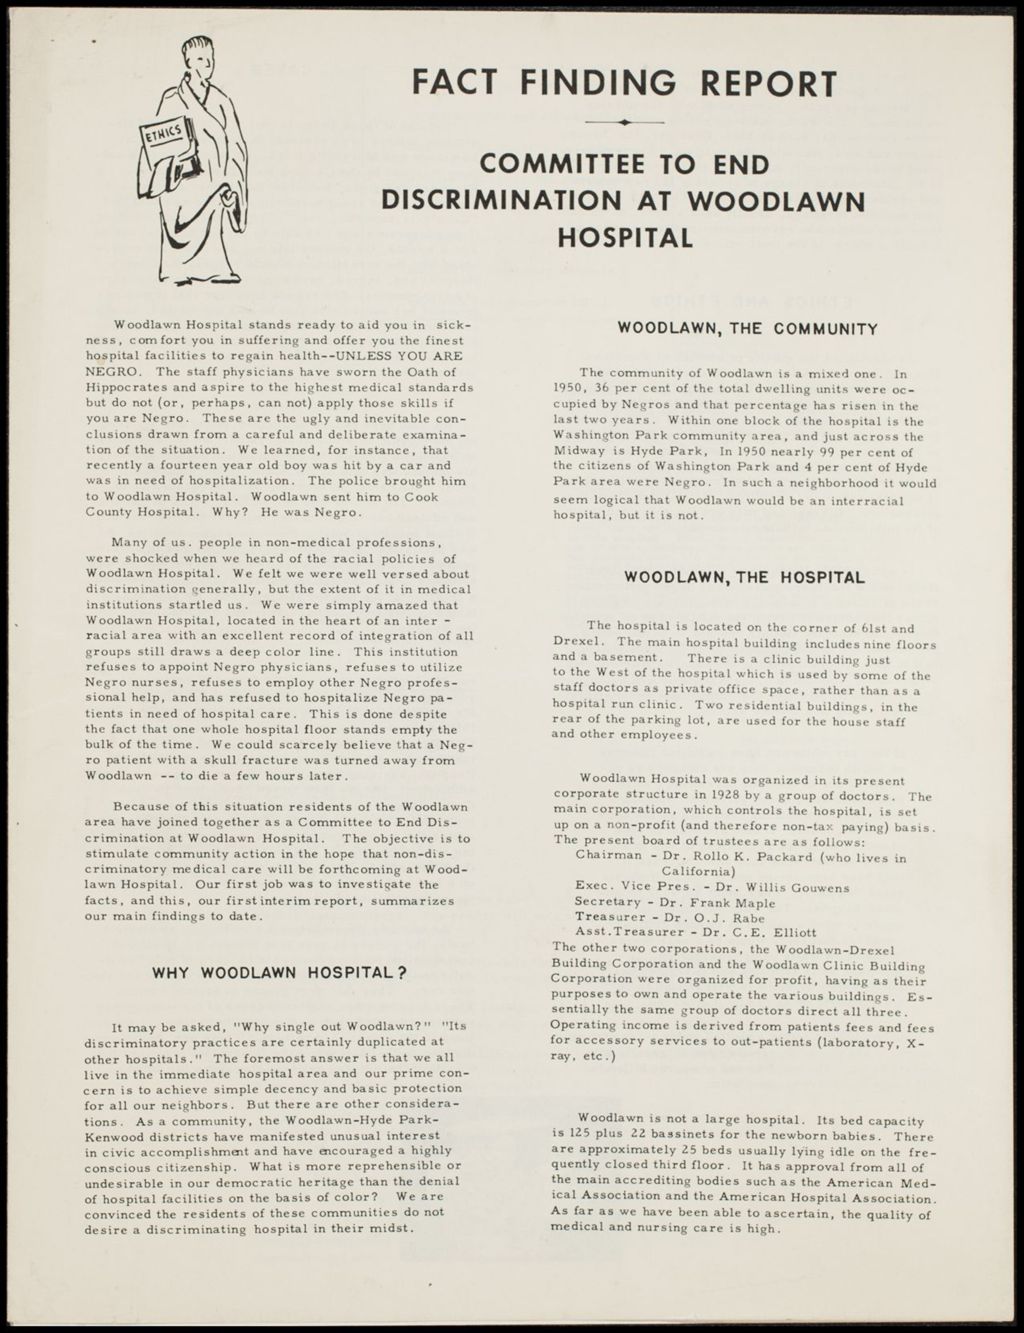 Miniature of Committee to End Discrimination at Woodlawn Hospital, undated (Folder I-2810)